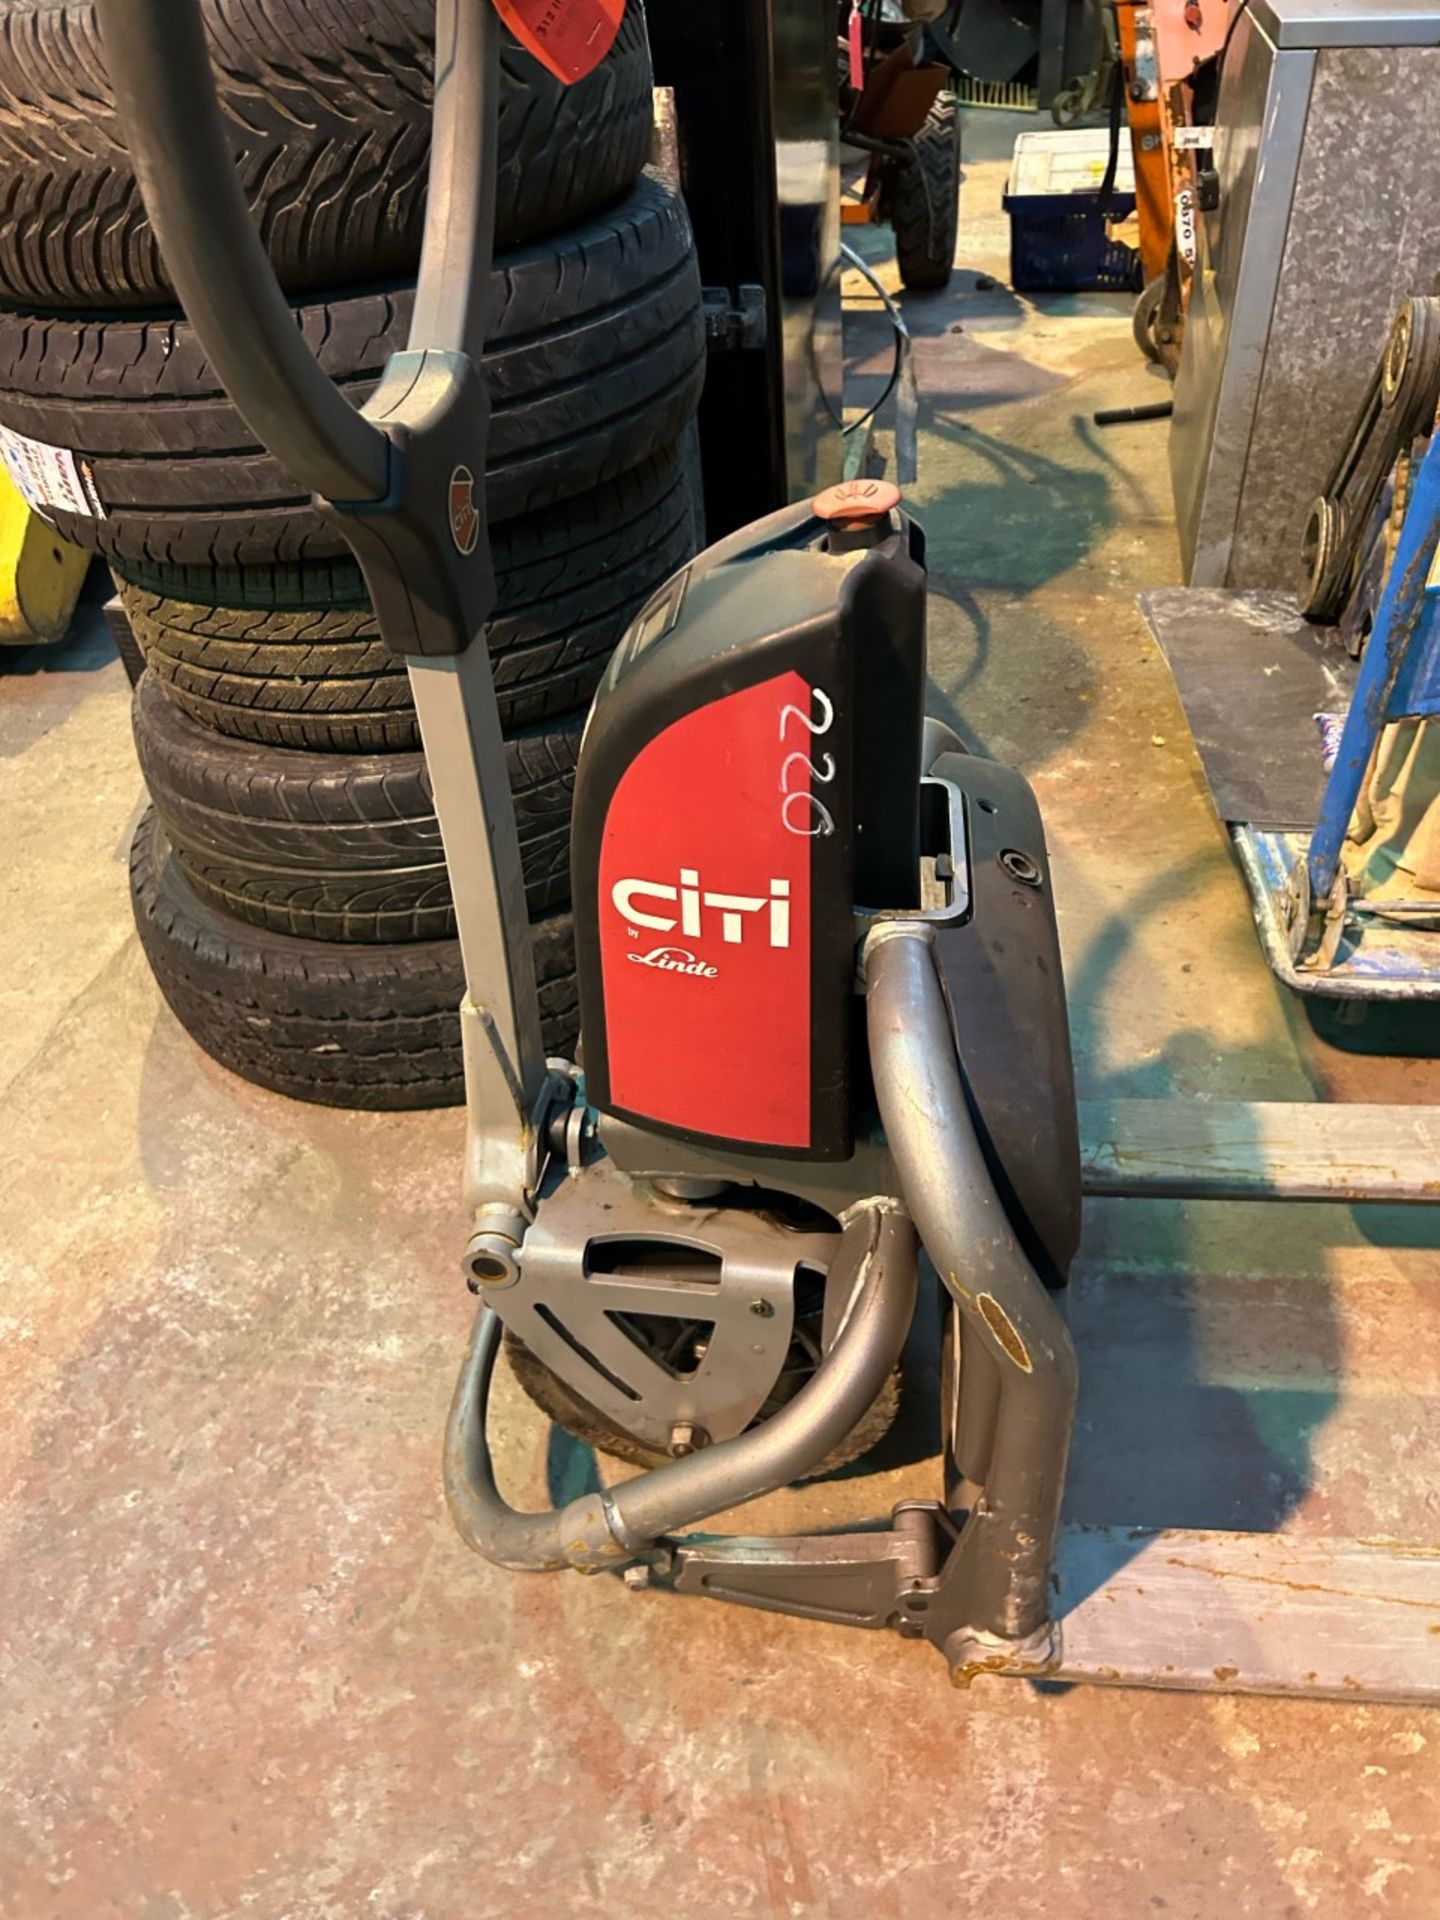 Linde citi battery powered pallet truck. Non runner - Image 4 of 4